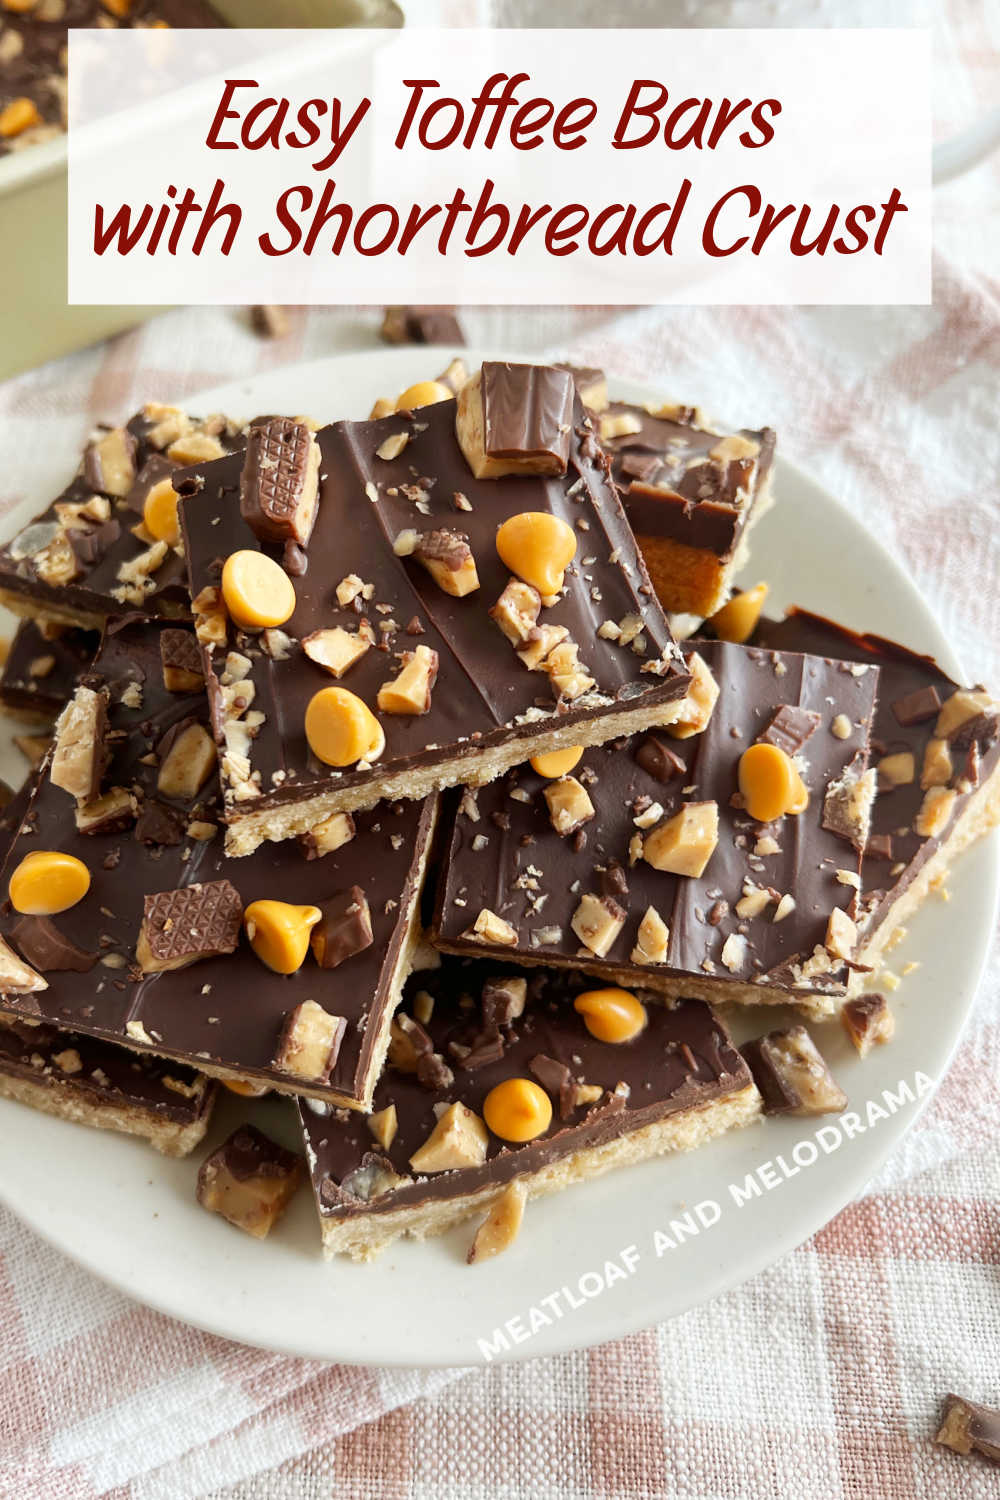 Easy Toffee Bars have a buttery brown sugar shortbread crust topped with melted chocolate, butterscotch chips and toffee bits. An easy dessert recipe perfect for the holiday season! via @meamel